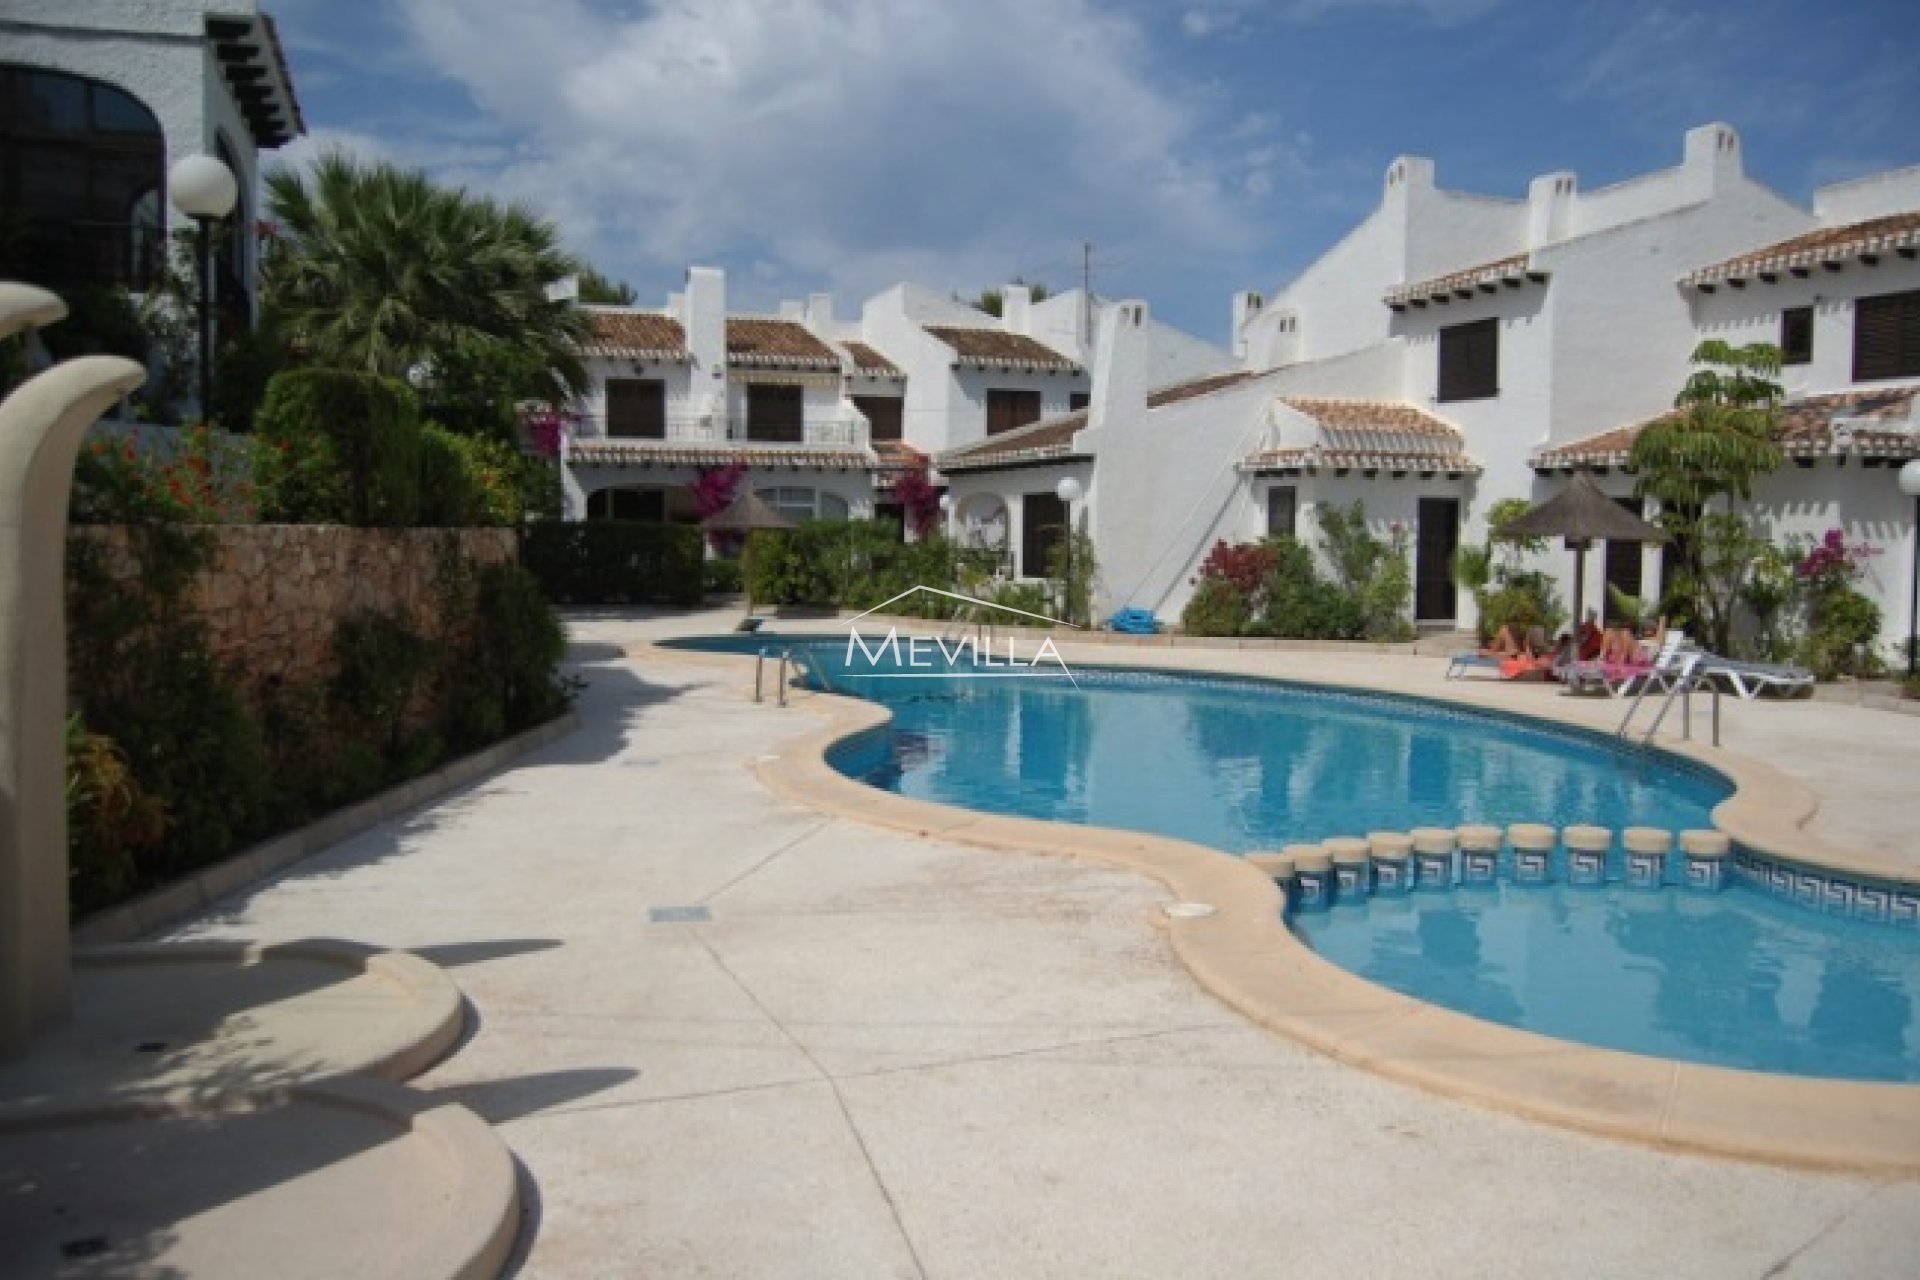 Townhouse in Los Angius III, Cabo Roig for sale